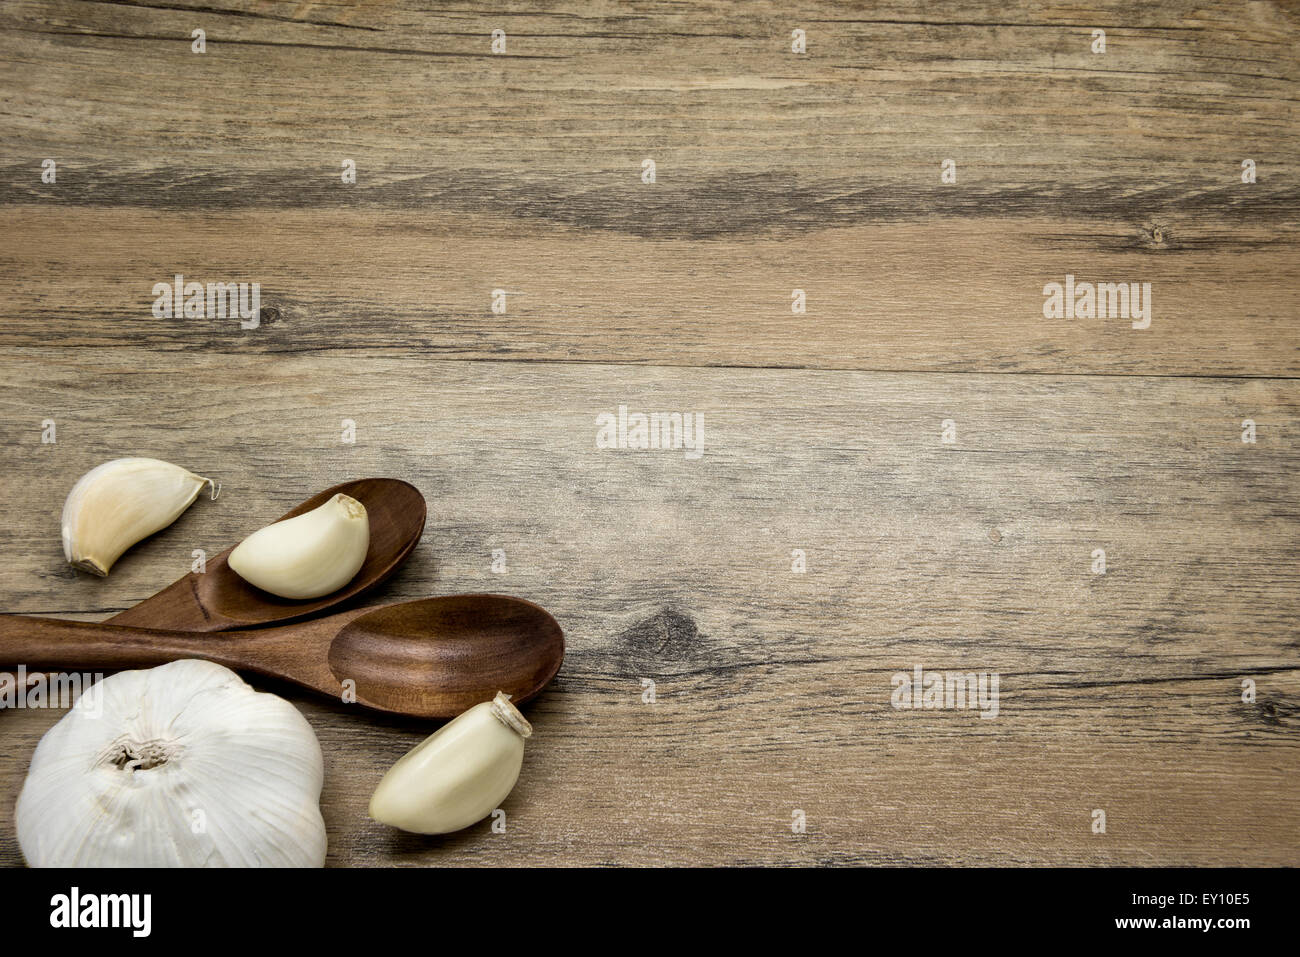 Garlic and wooden spoons. Rustic composition. Stock Photo